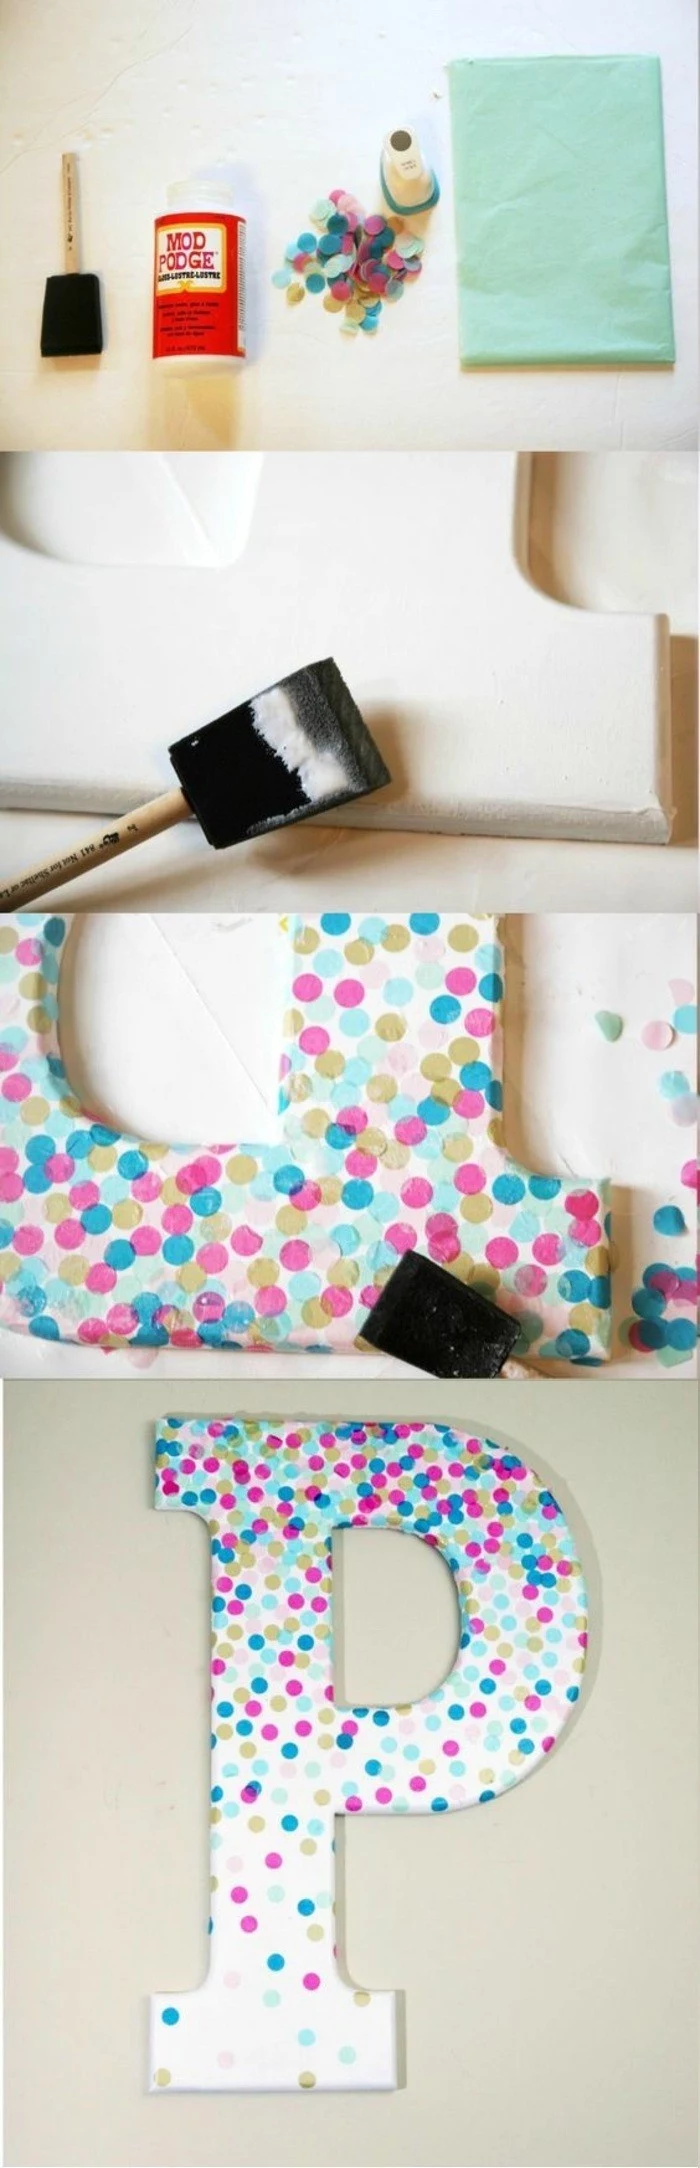 colourful confetti, glued to white carton, in the shape of the letter p, cool art designs, diy tutorial